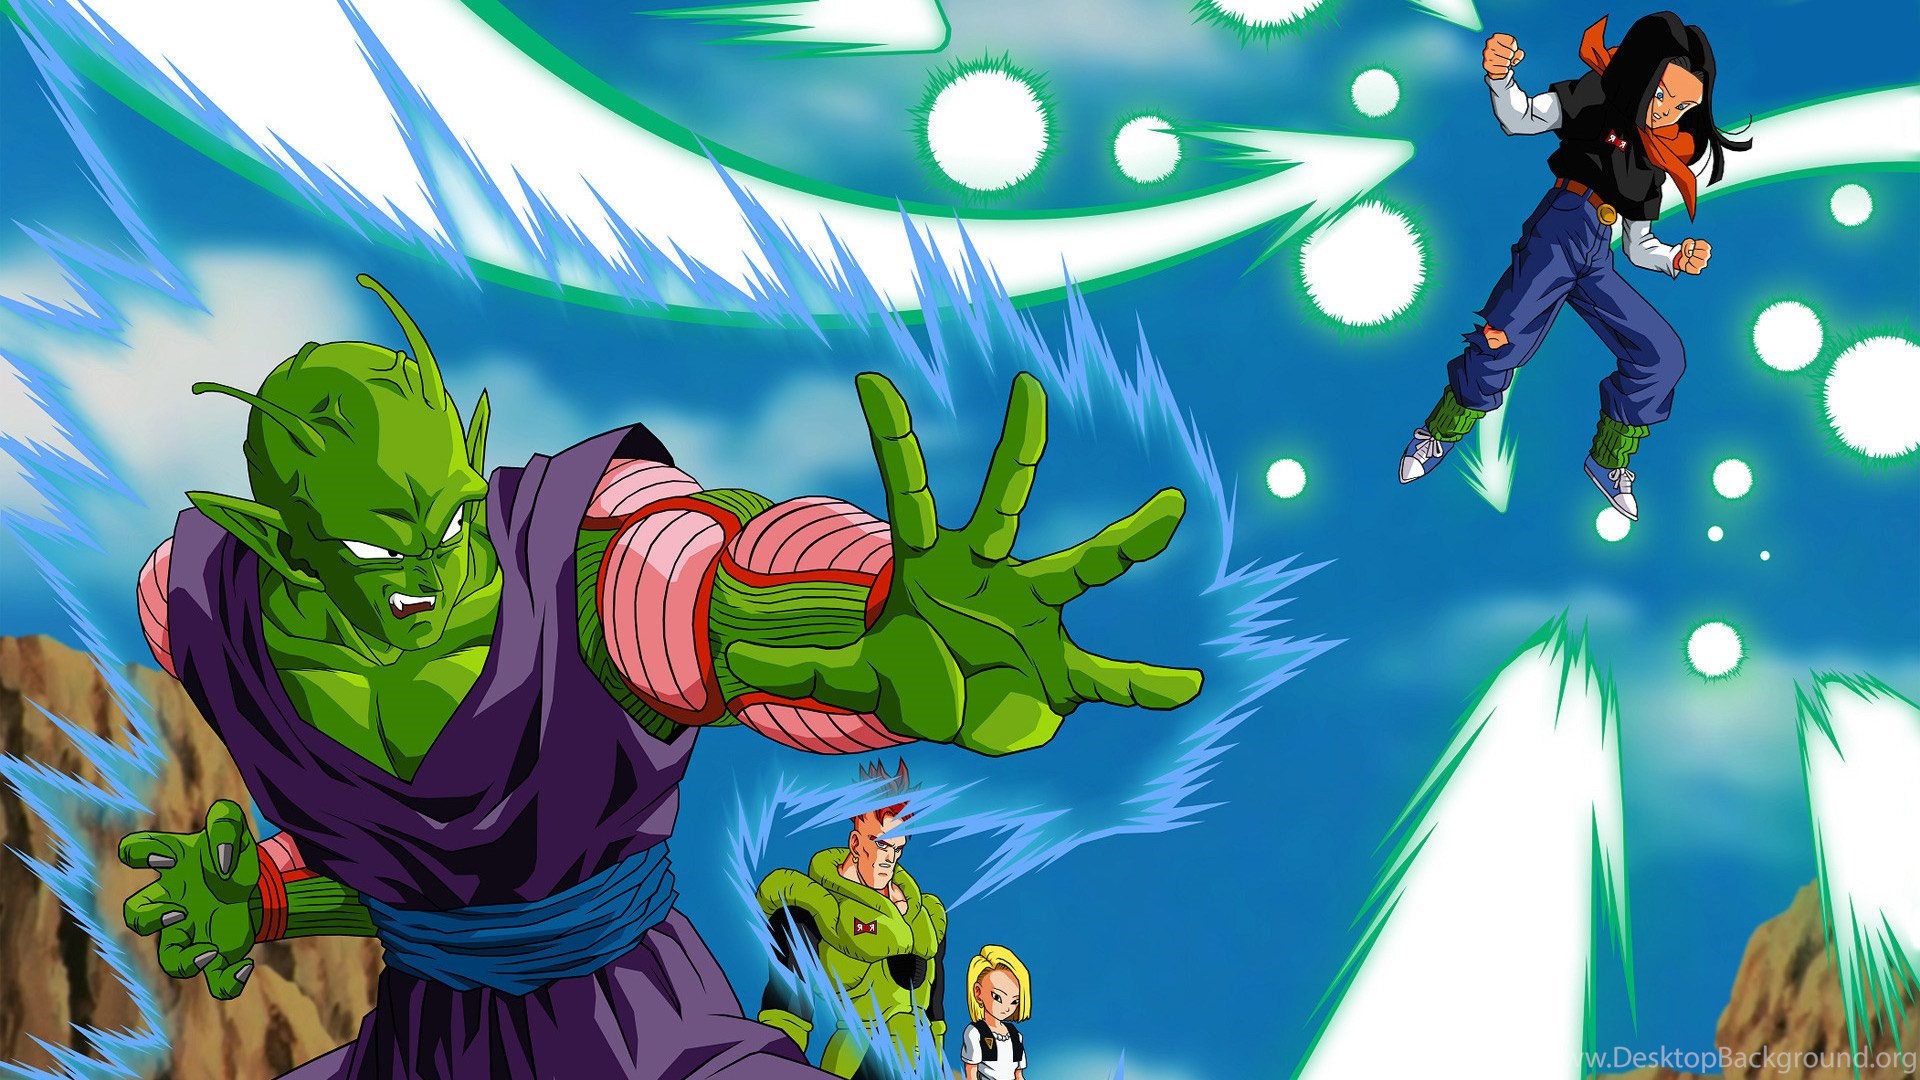 Dragon Ball Z Piccolo Versus Android 17 Wallpapers Desktop Background